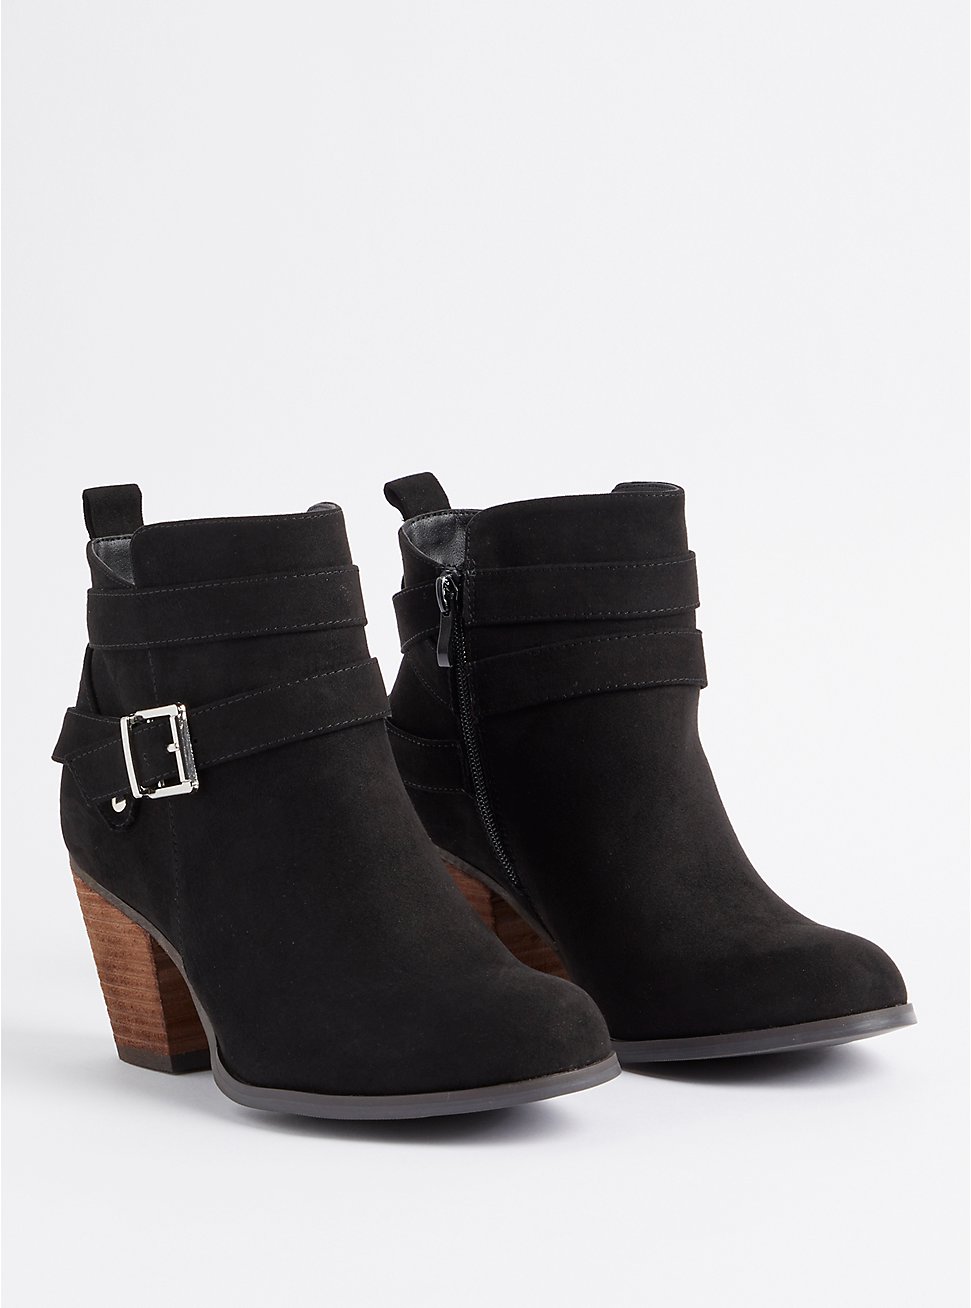 Plus Size Stacked Ankle Bootie - Black (WW), BLACK, hi-res